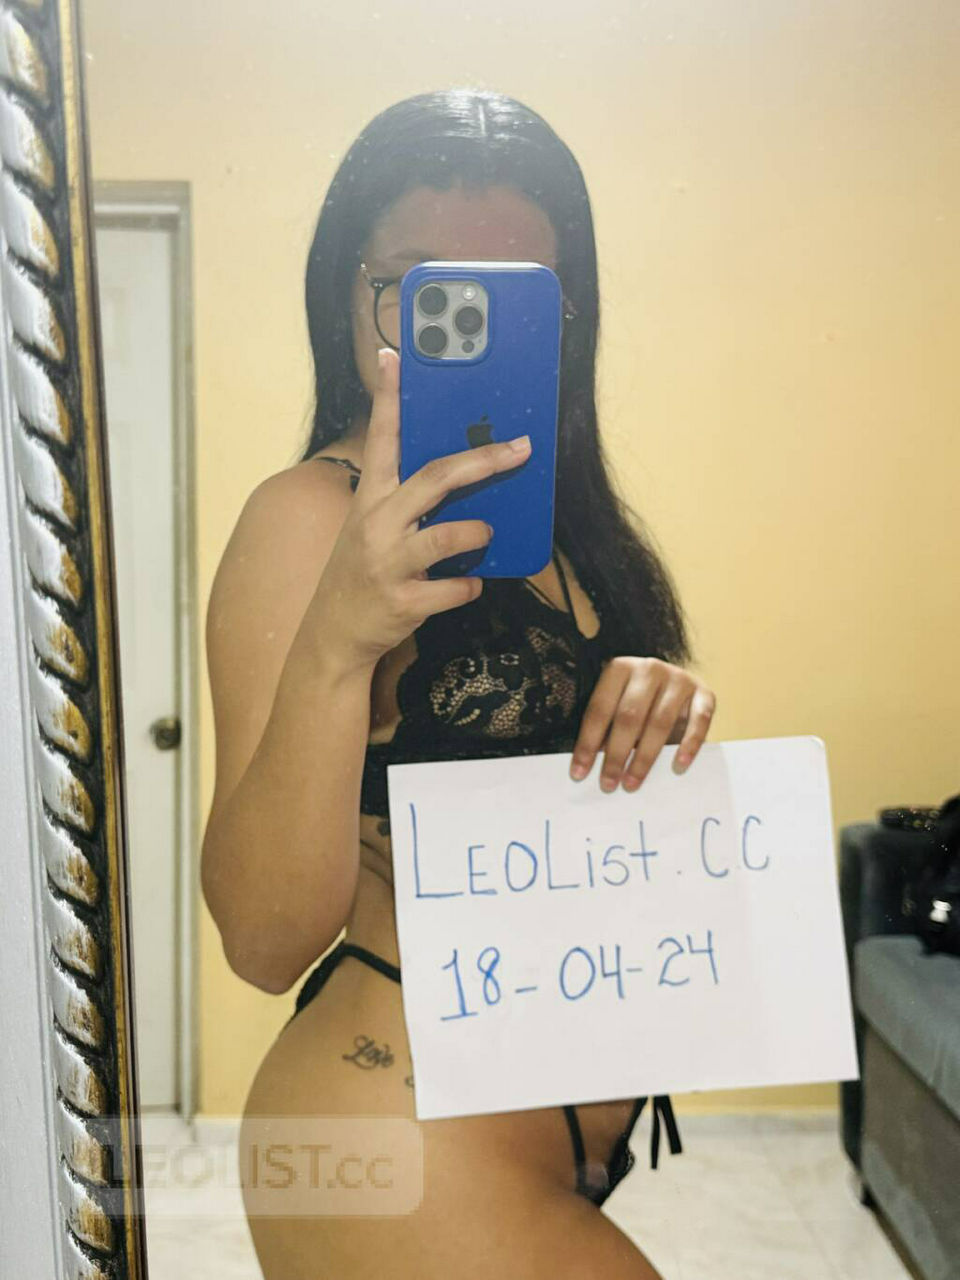 Escorts Charlottetown, Prince Edward Island available cash only work